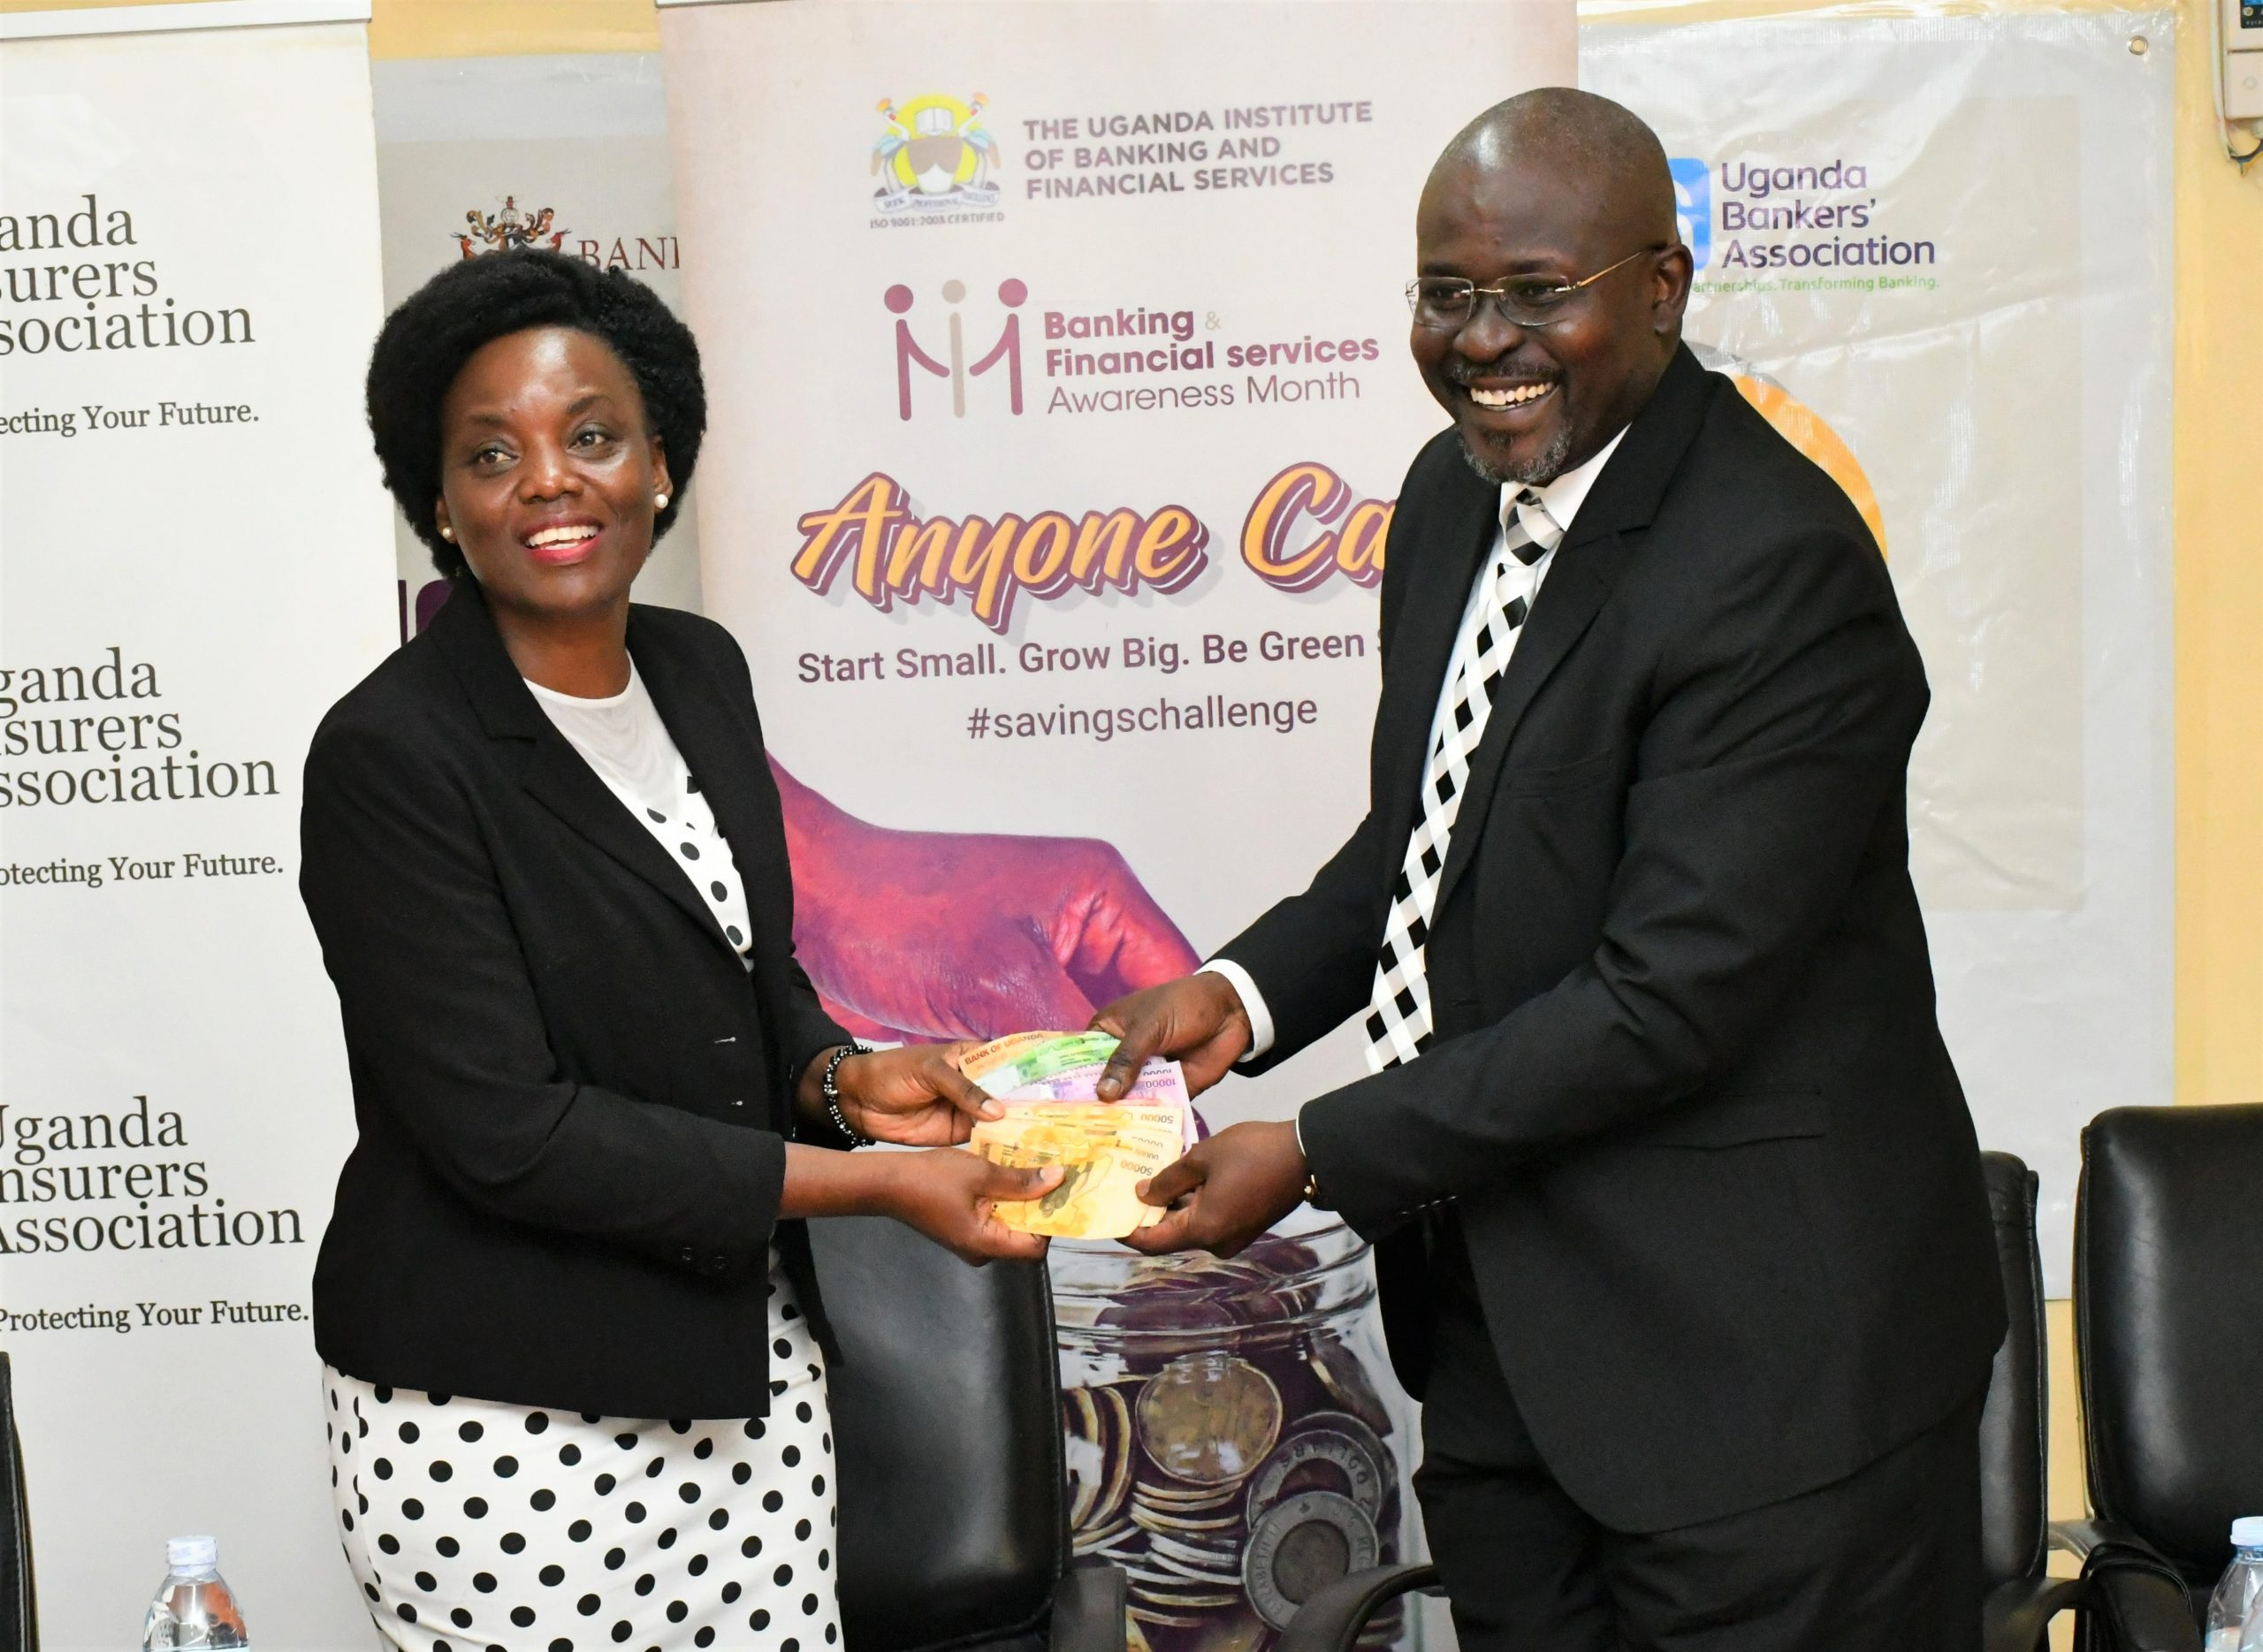 DPF Hands Over UGX 1,546,300 Collected During The 2023 Savings Challenge – April 4, 2023